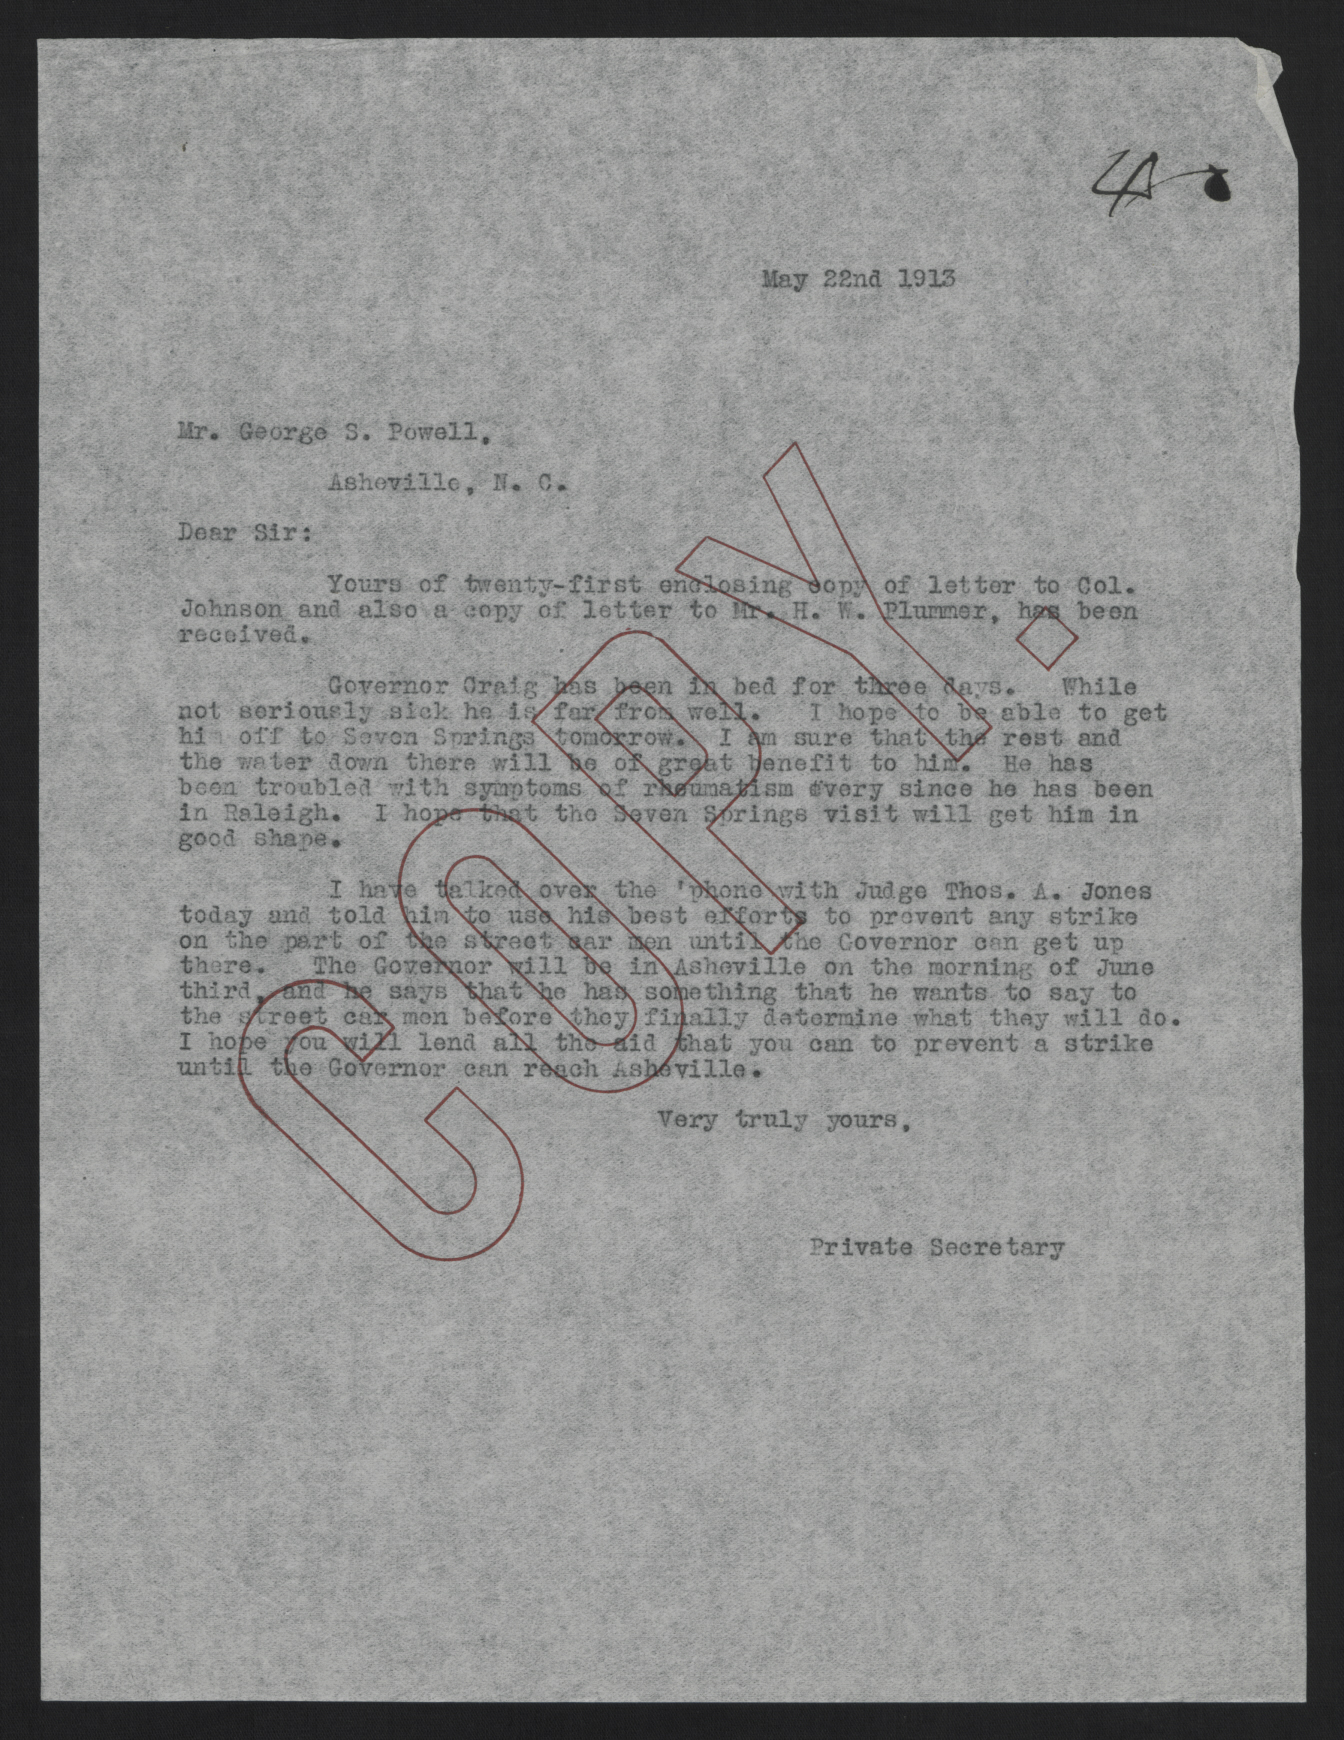 Letter from Kerr to Powell, May 22, 1913